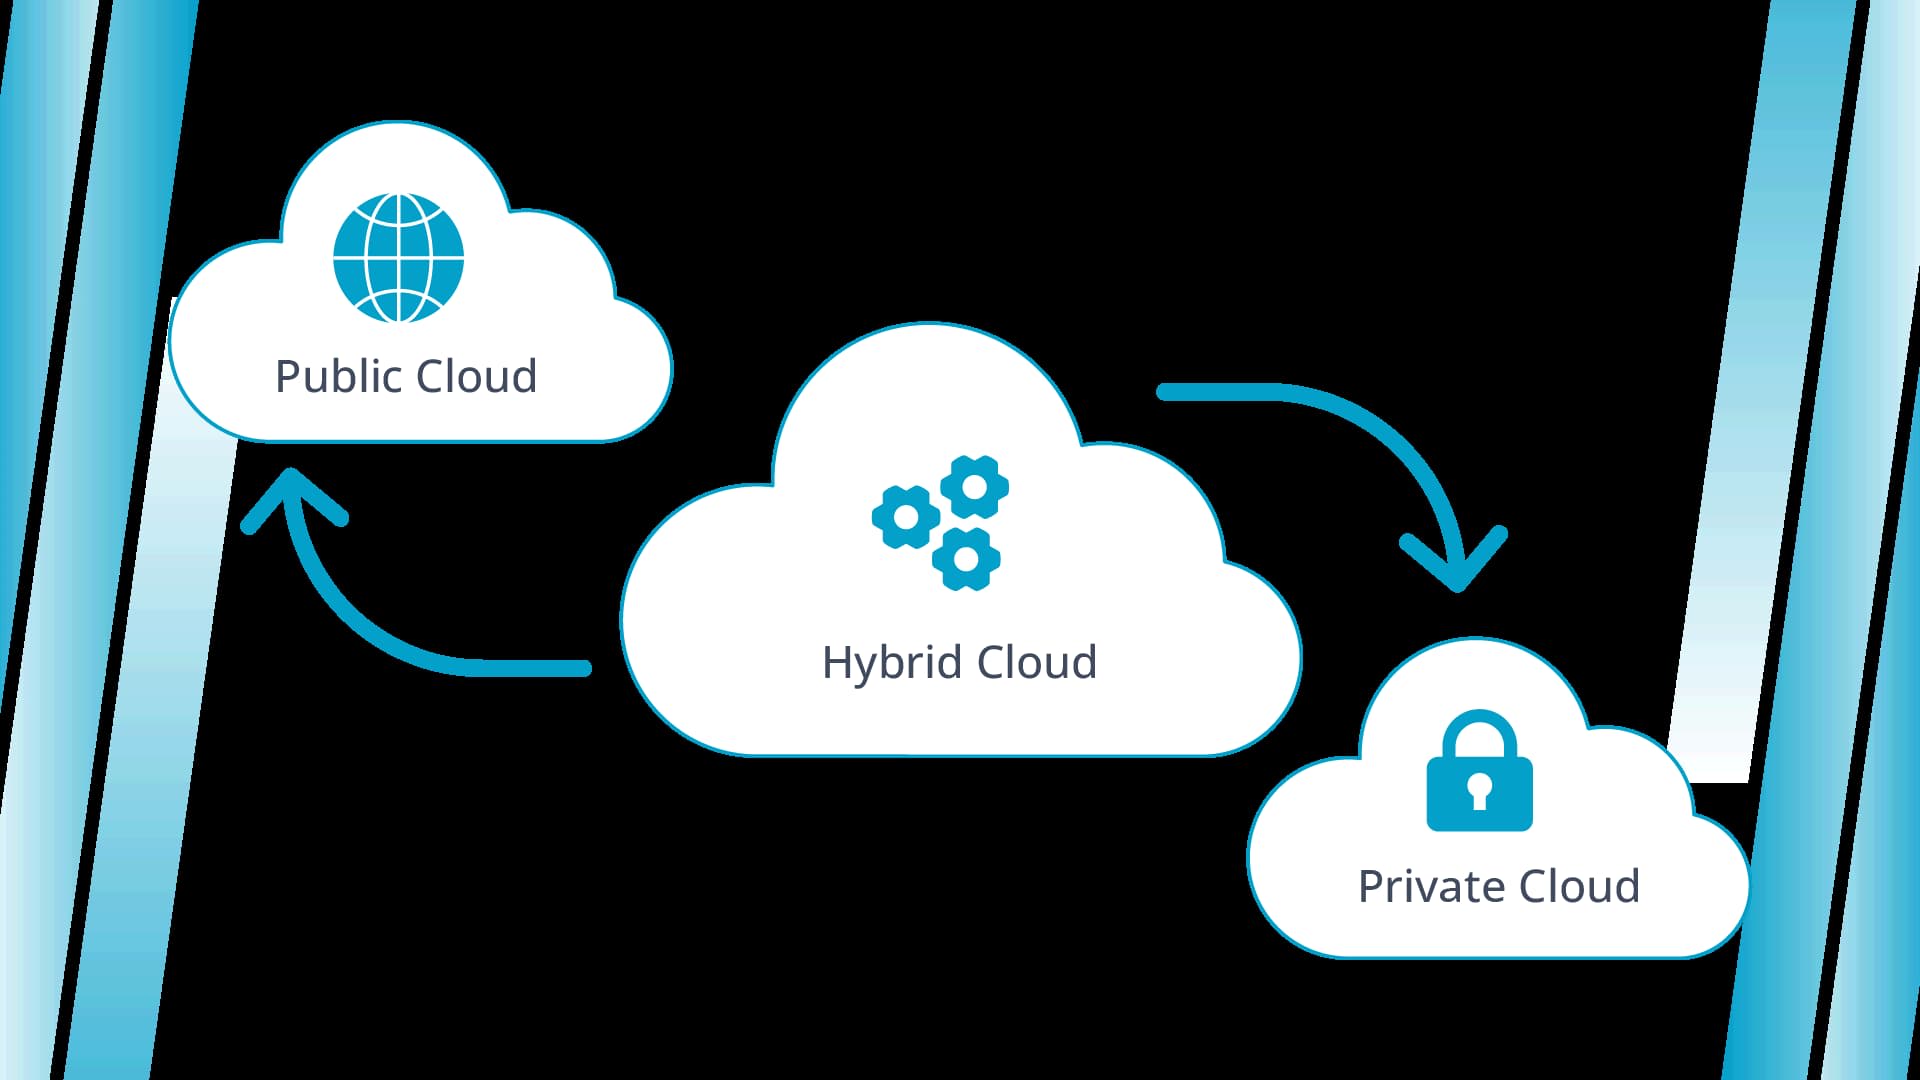 An enterprise hybrid cloud combines infrastructure from private and public clouds.